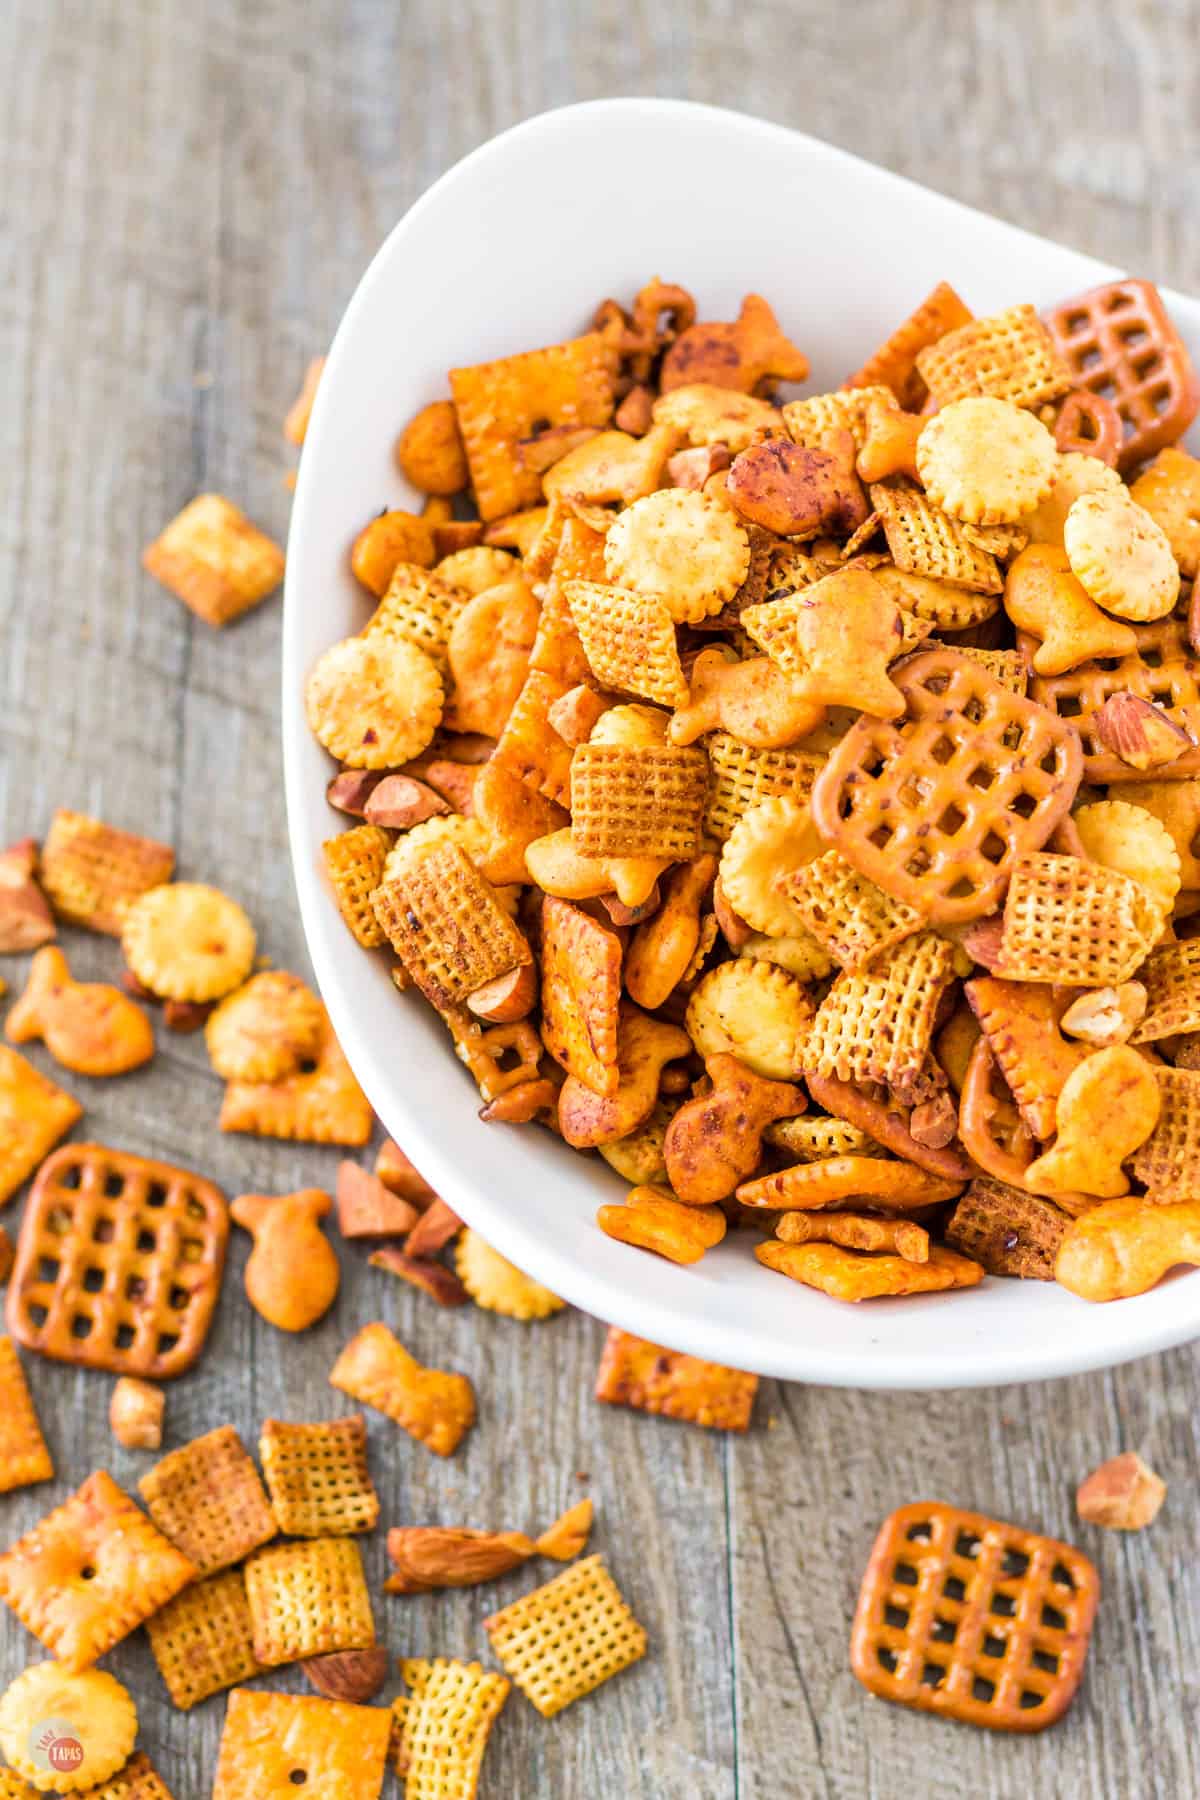 original chex mix recipe but with a few additions and spicy sauce